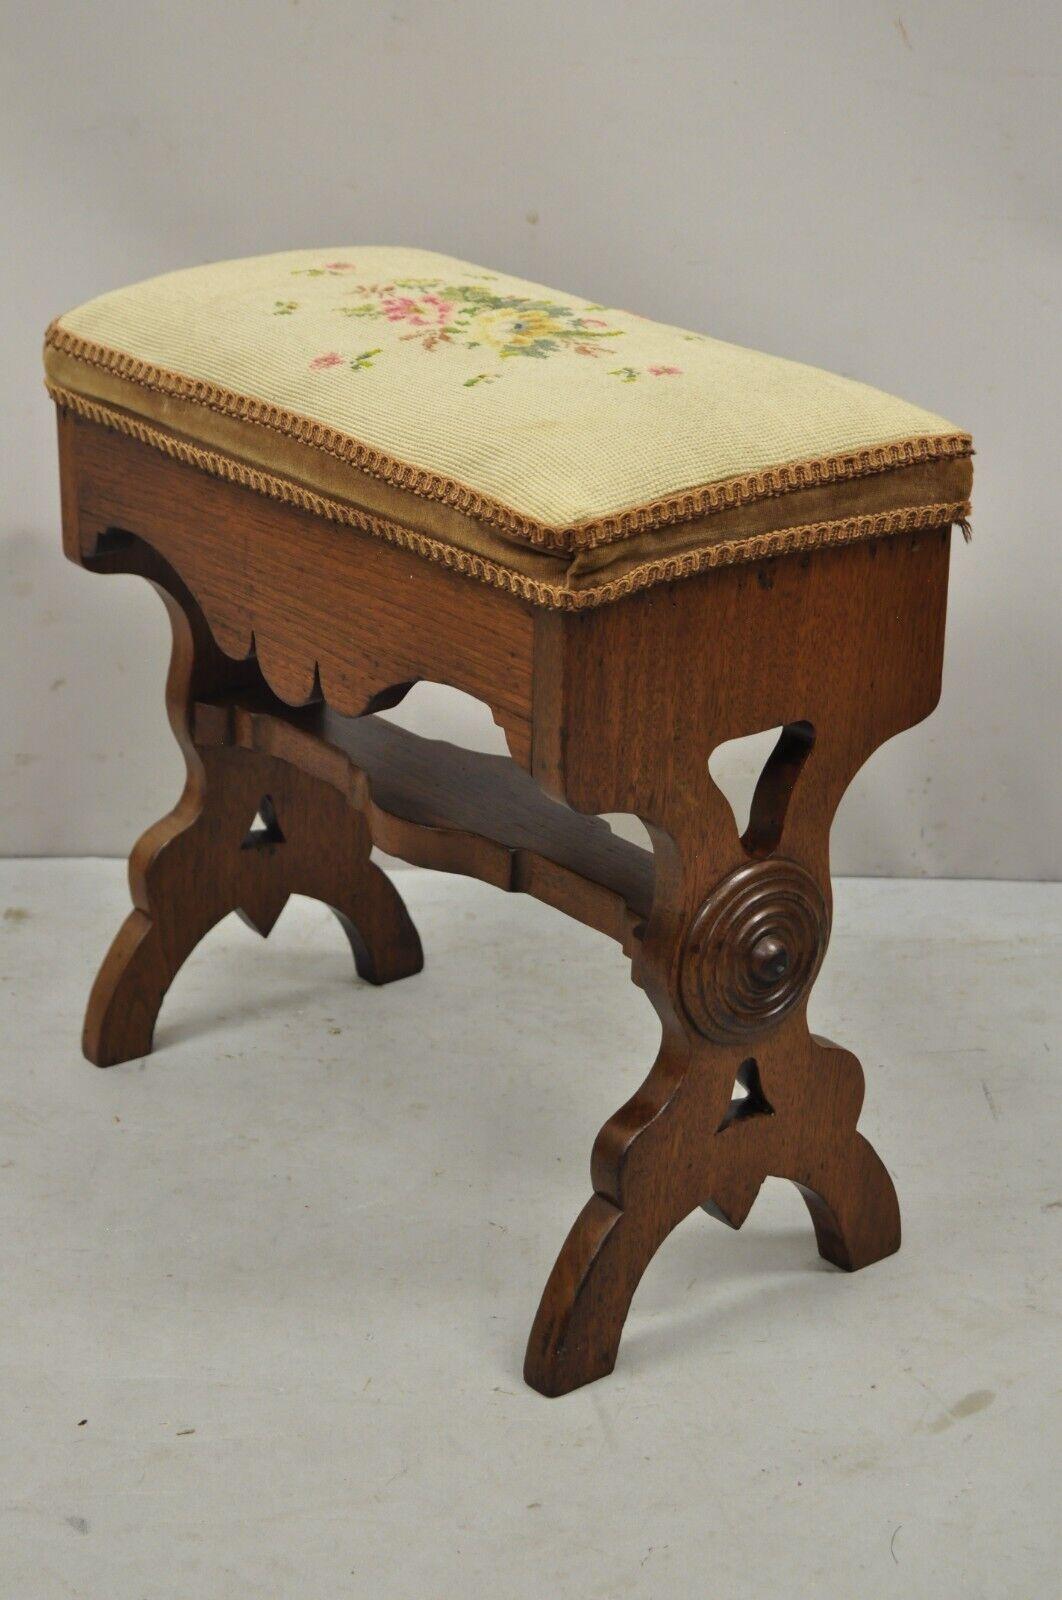 Antique Eastlake Victorian Carved Walnut Stool Bench with Needlepoint Seat For Sale 2